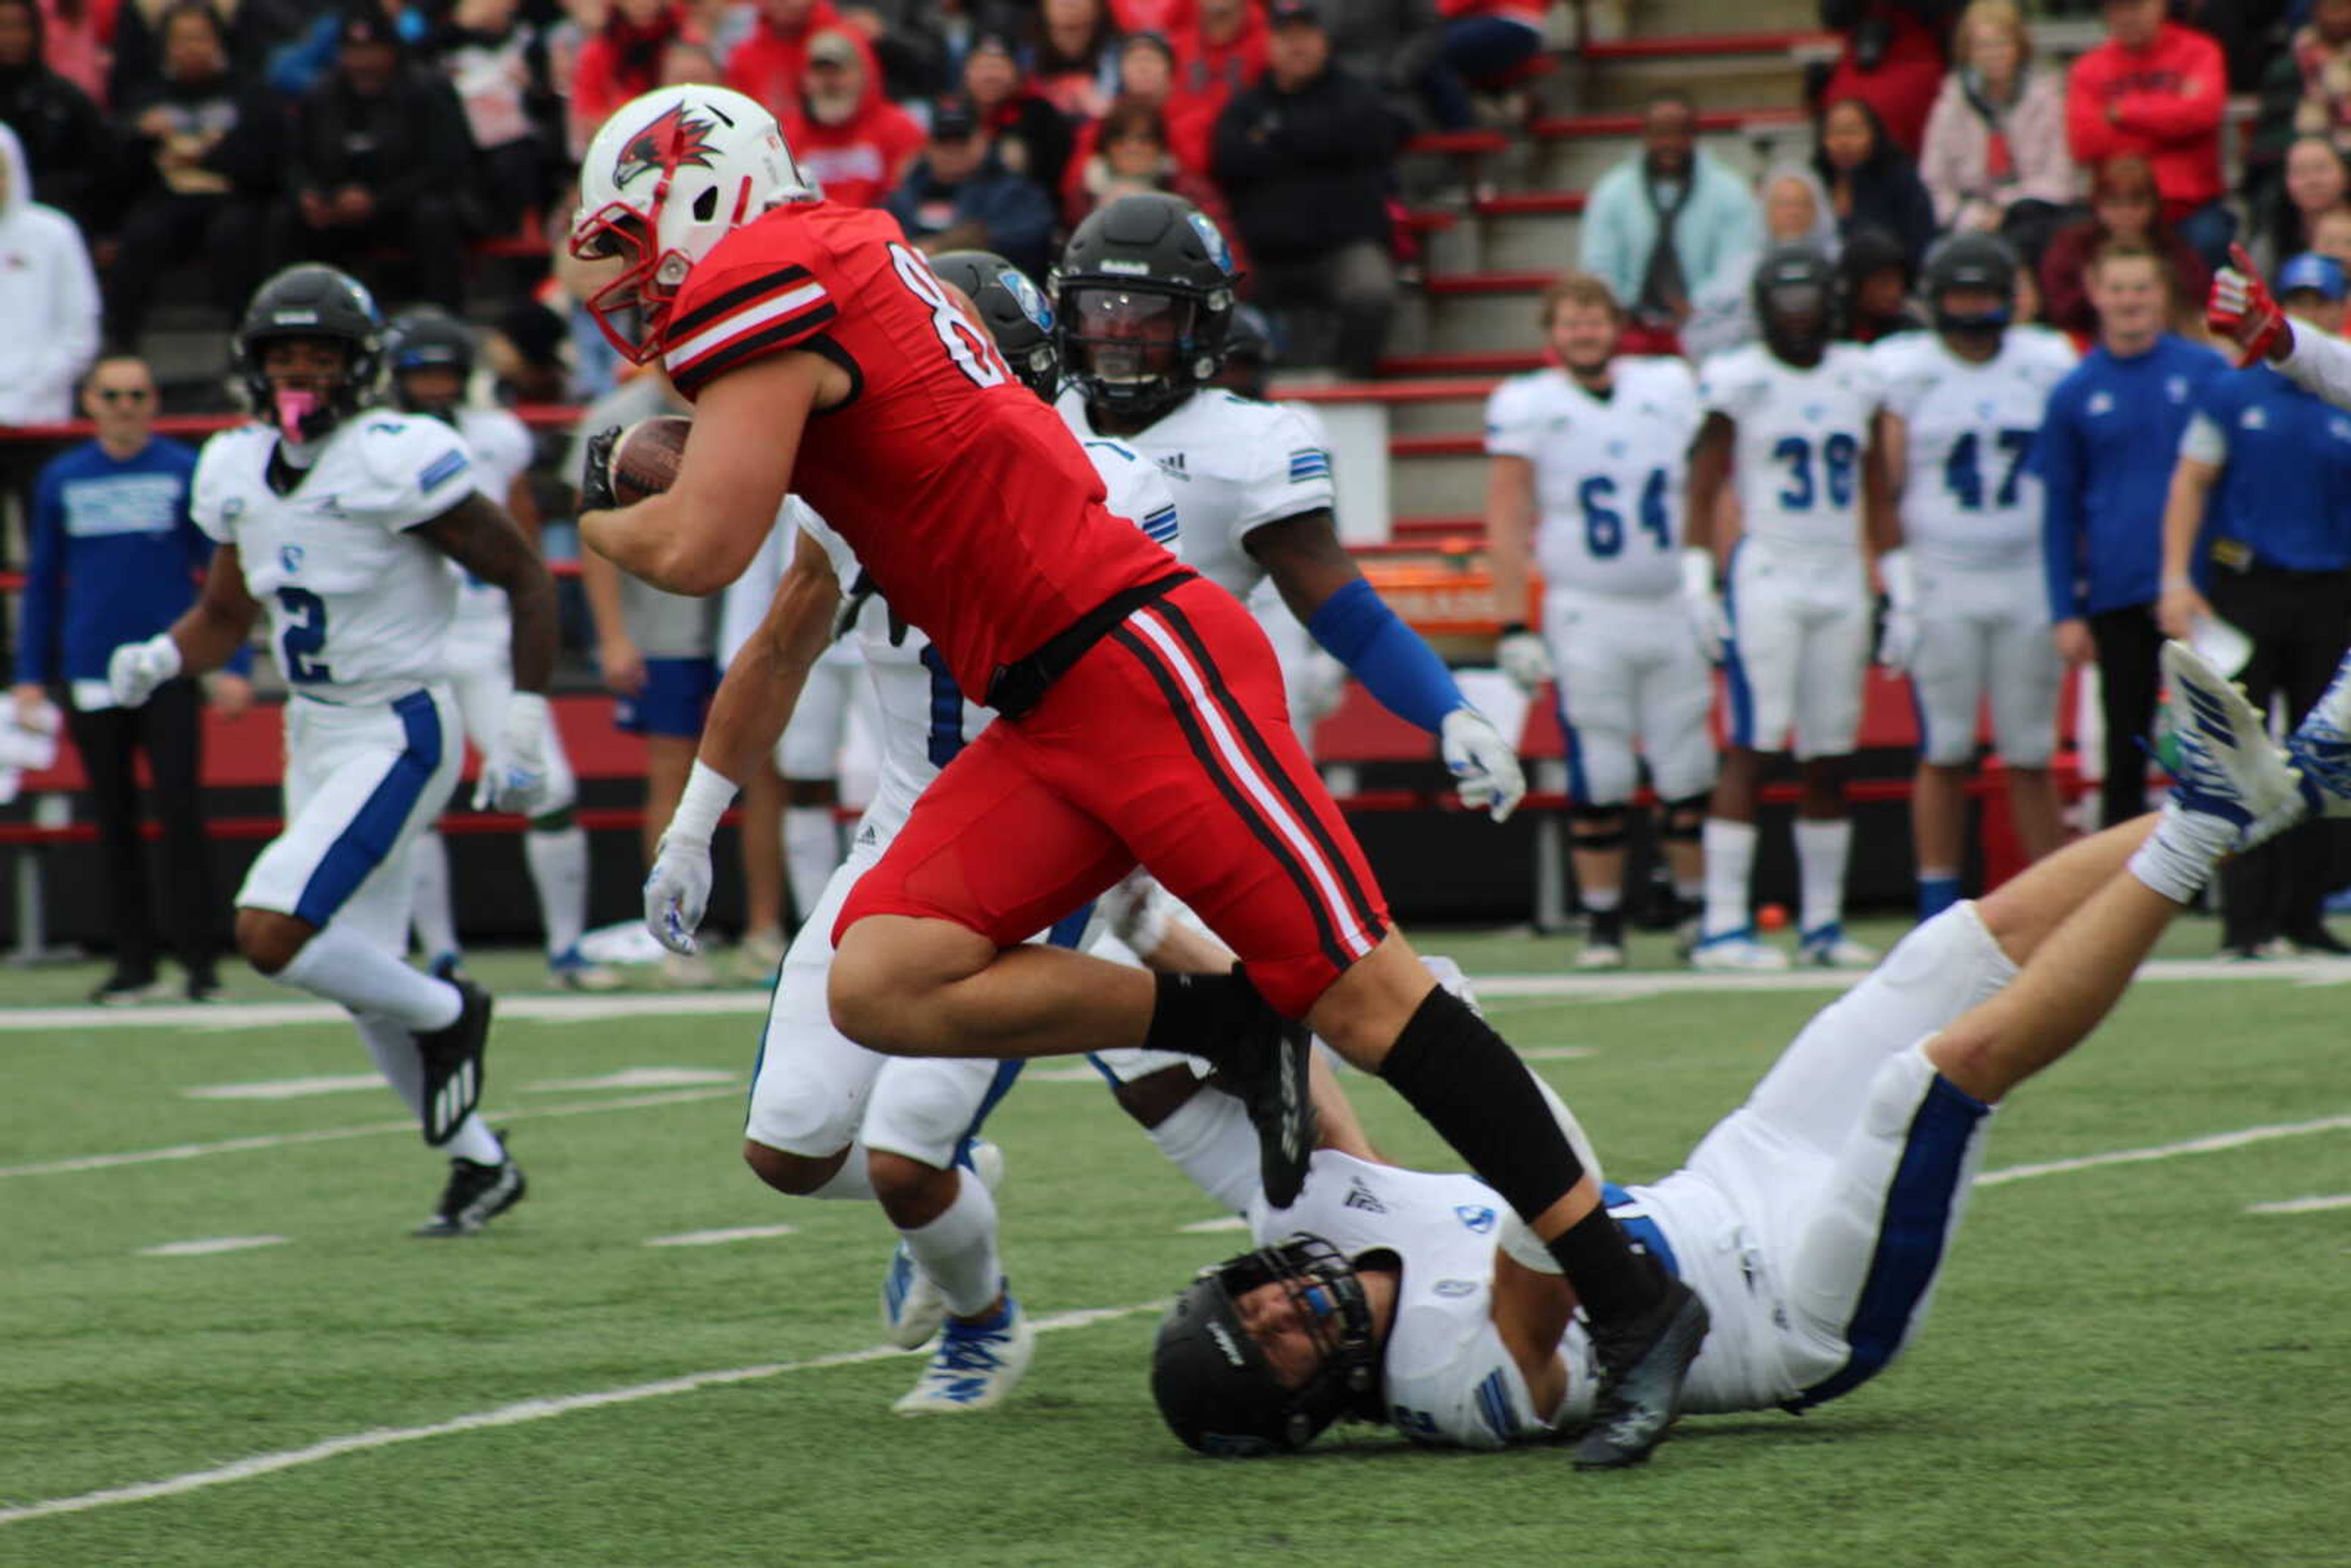 Senior tight end Caleb Strauss runs the ball down the field in SEMO's Homecoming game against Eastern Illinois on Oct. 30. Southeast brought home the win 38-15.